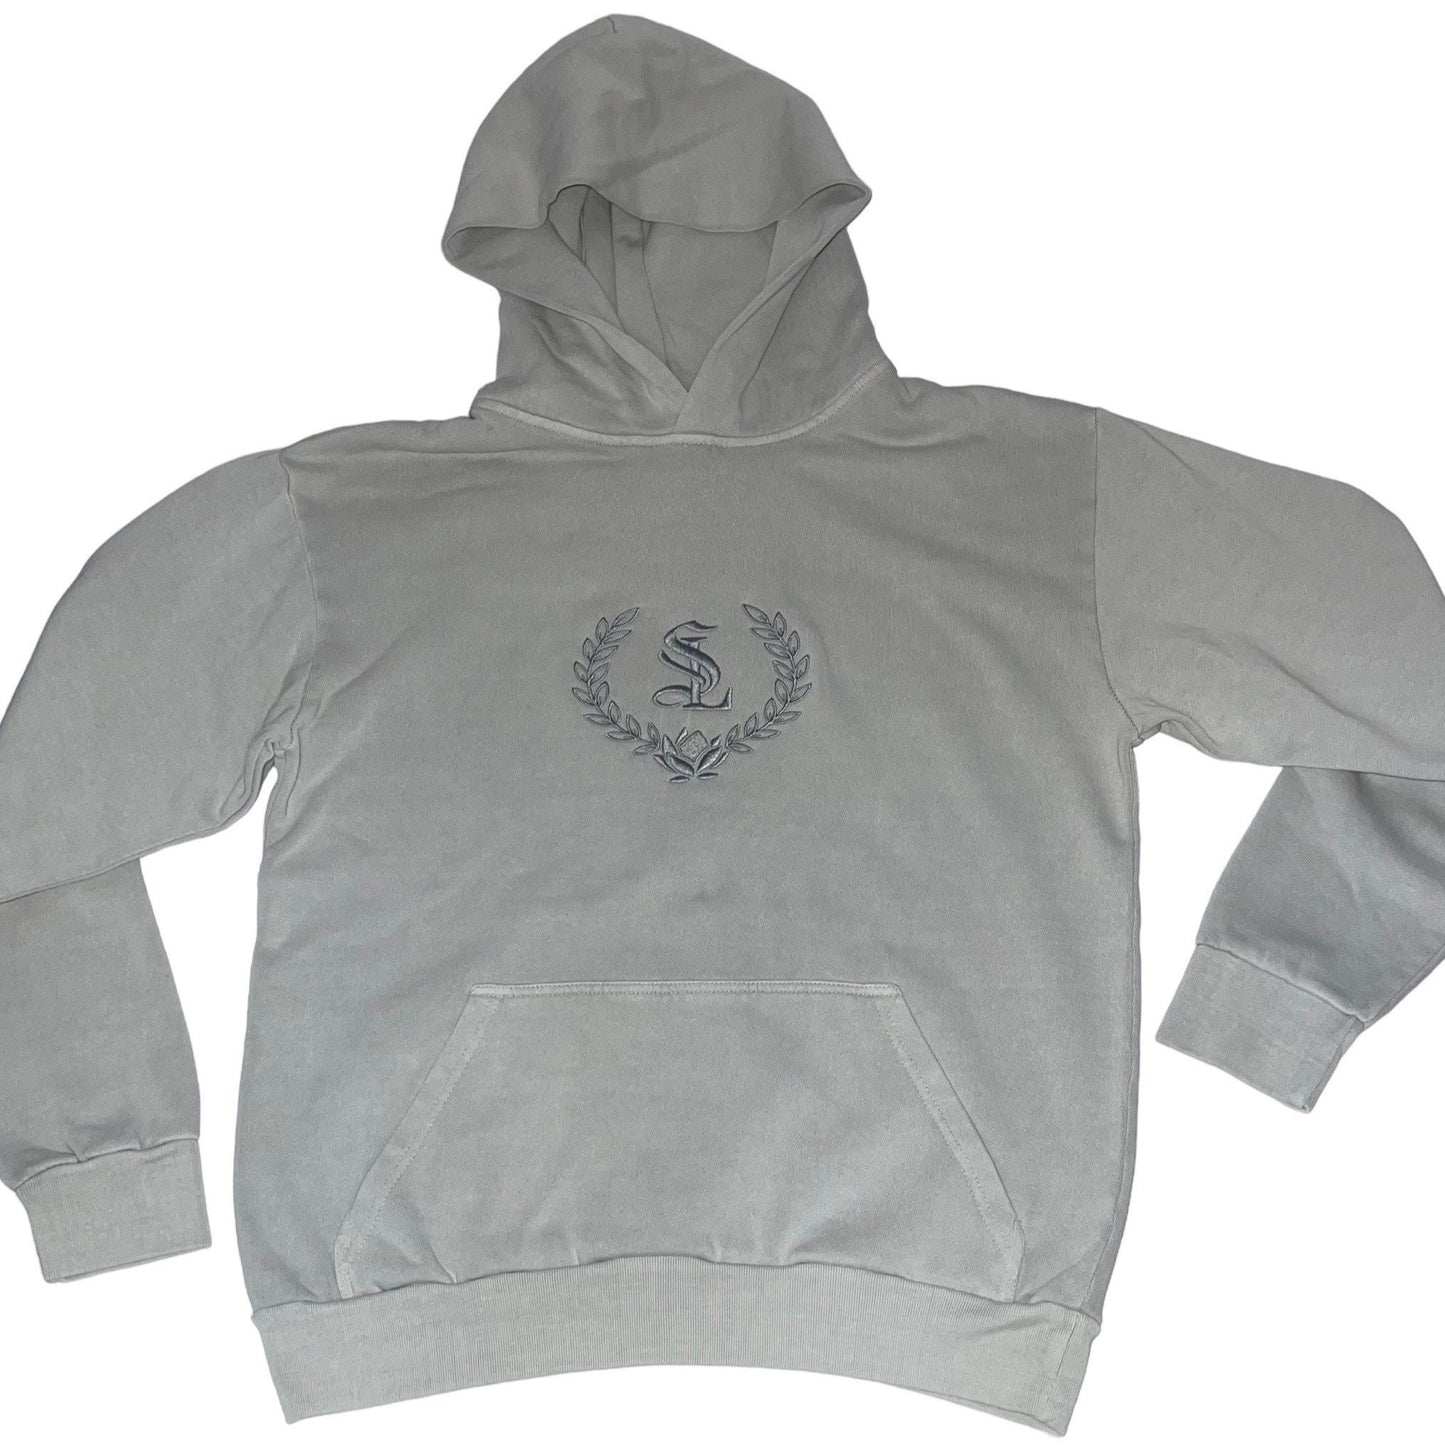 Lotus Crest - Embroidered Sweatsuit Top - Fog - Urban Pullover Hoodie